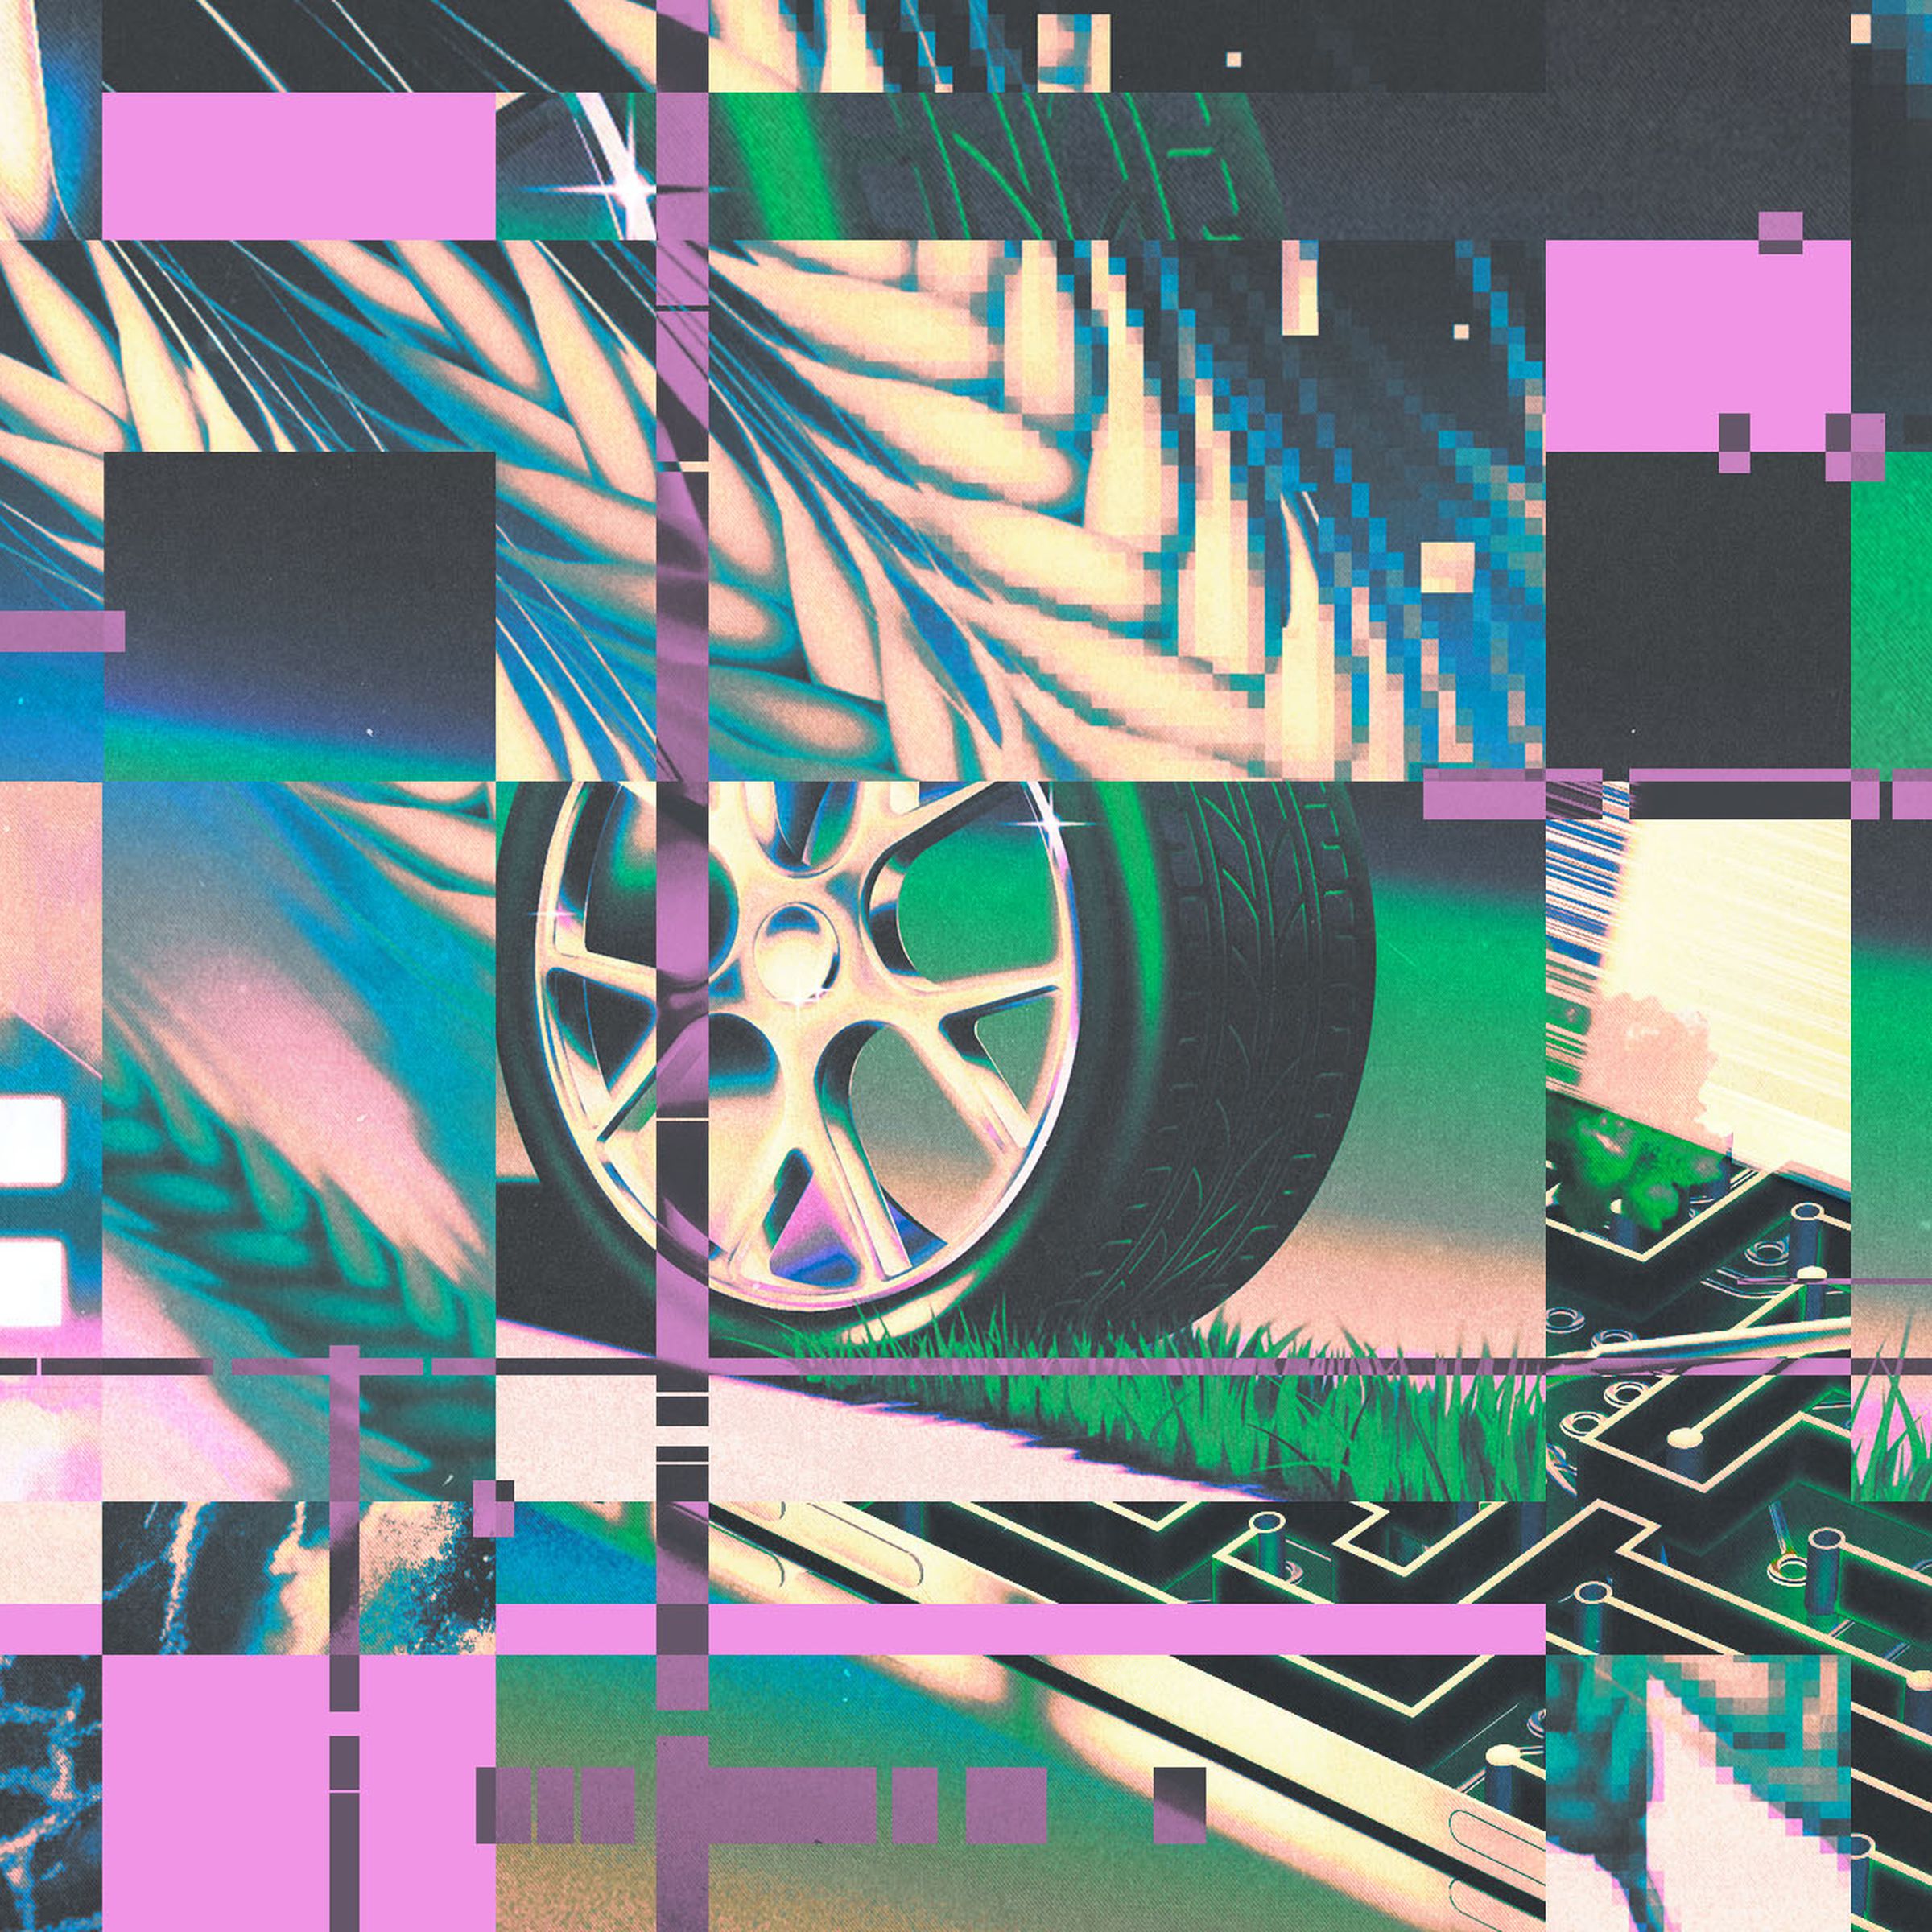 A digital collage of a variety of softly rendered illustrations showing pixelated chaffs of wheat, a car tire, growing grass, and a circuit board maze.